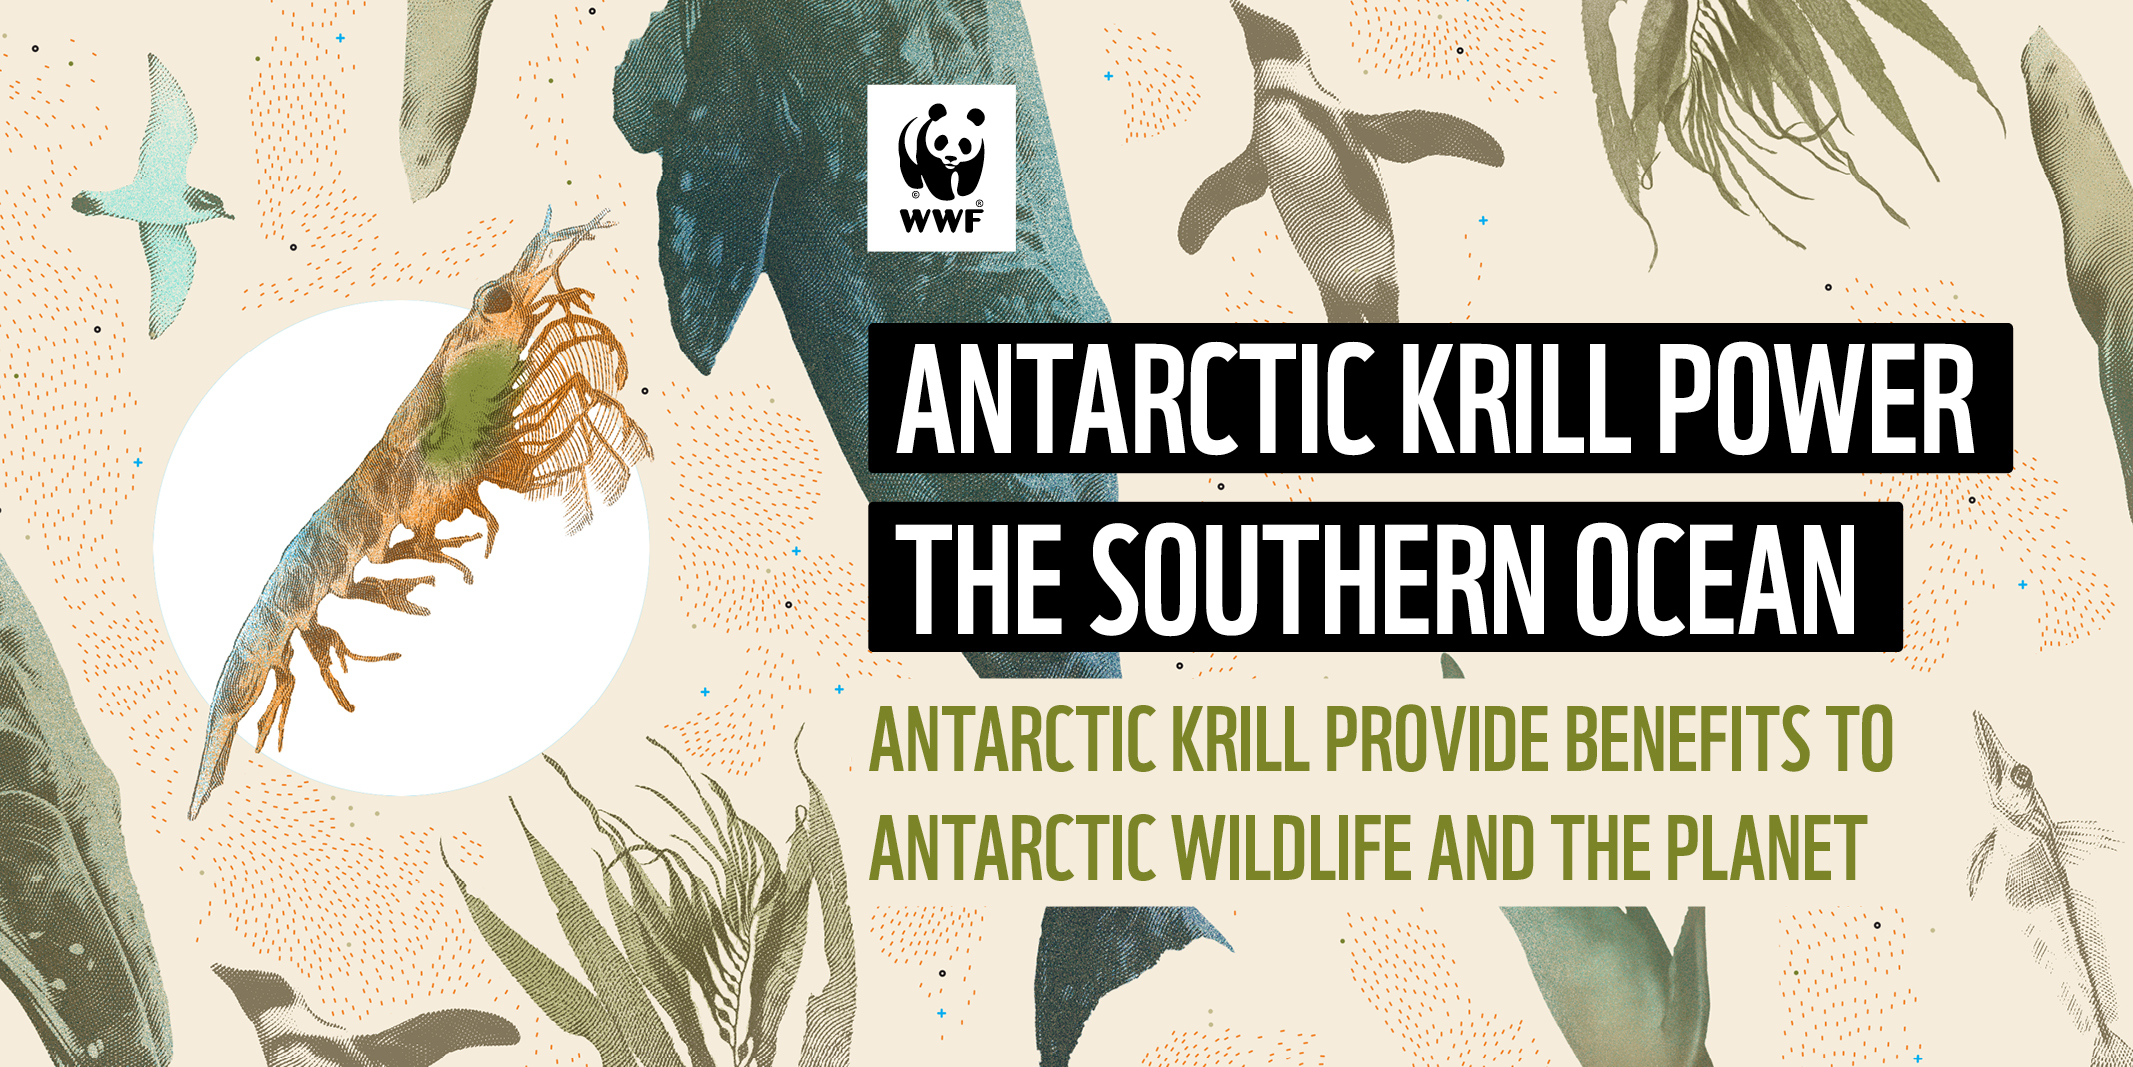 Lead scientist in WWF report on krill carbon